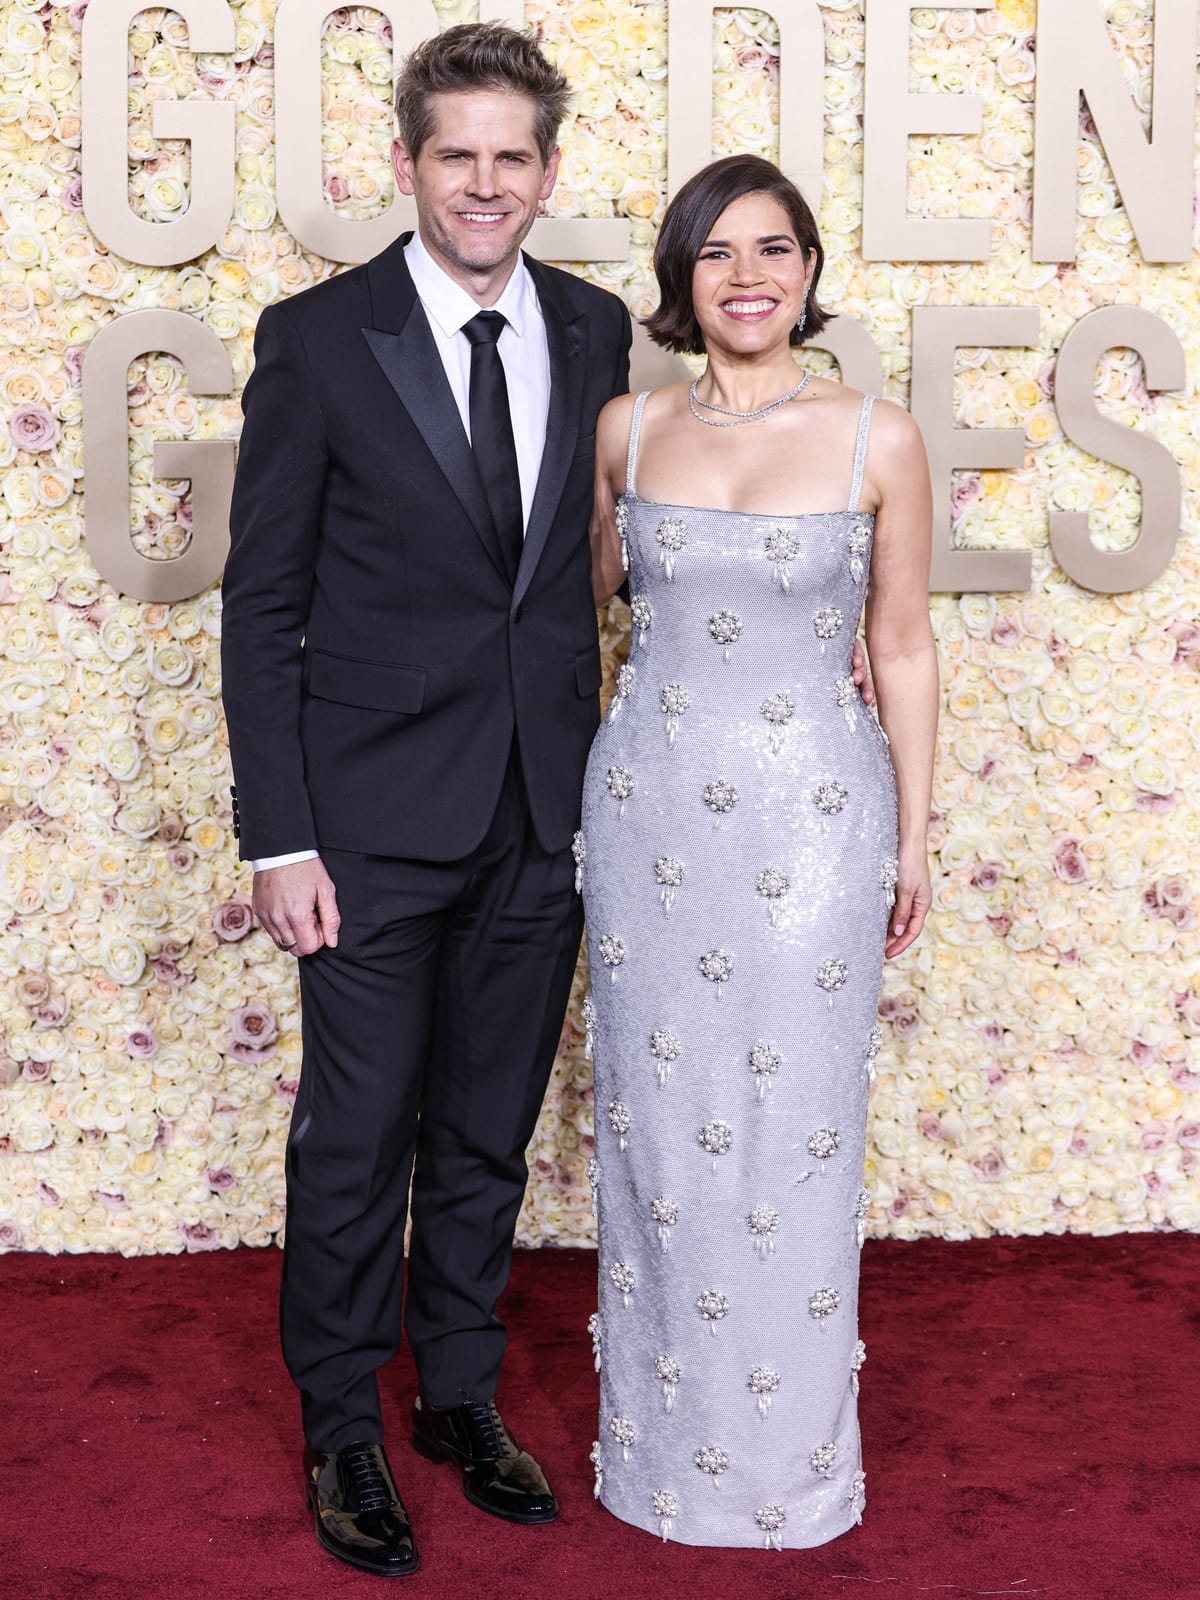 At the 81st Golden Globe Awards in Beverly Hills, America Ferrera, accompanied by her husband Ryan Piers Williams, radiates glamour in a form-fitting silver gown from Dolce & Gabbana